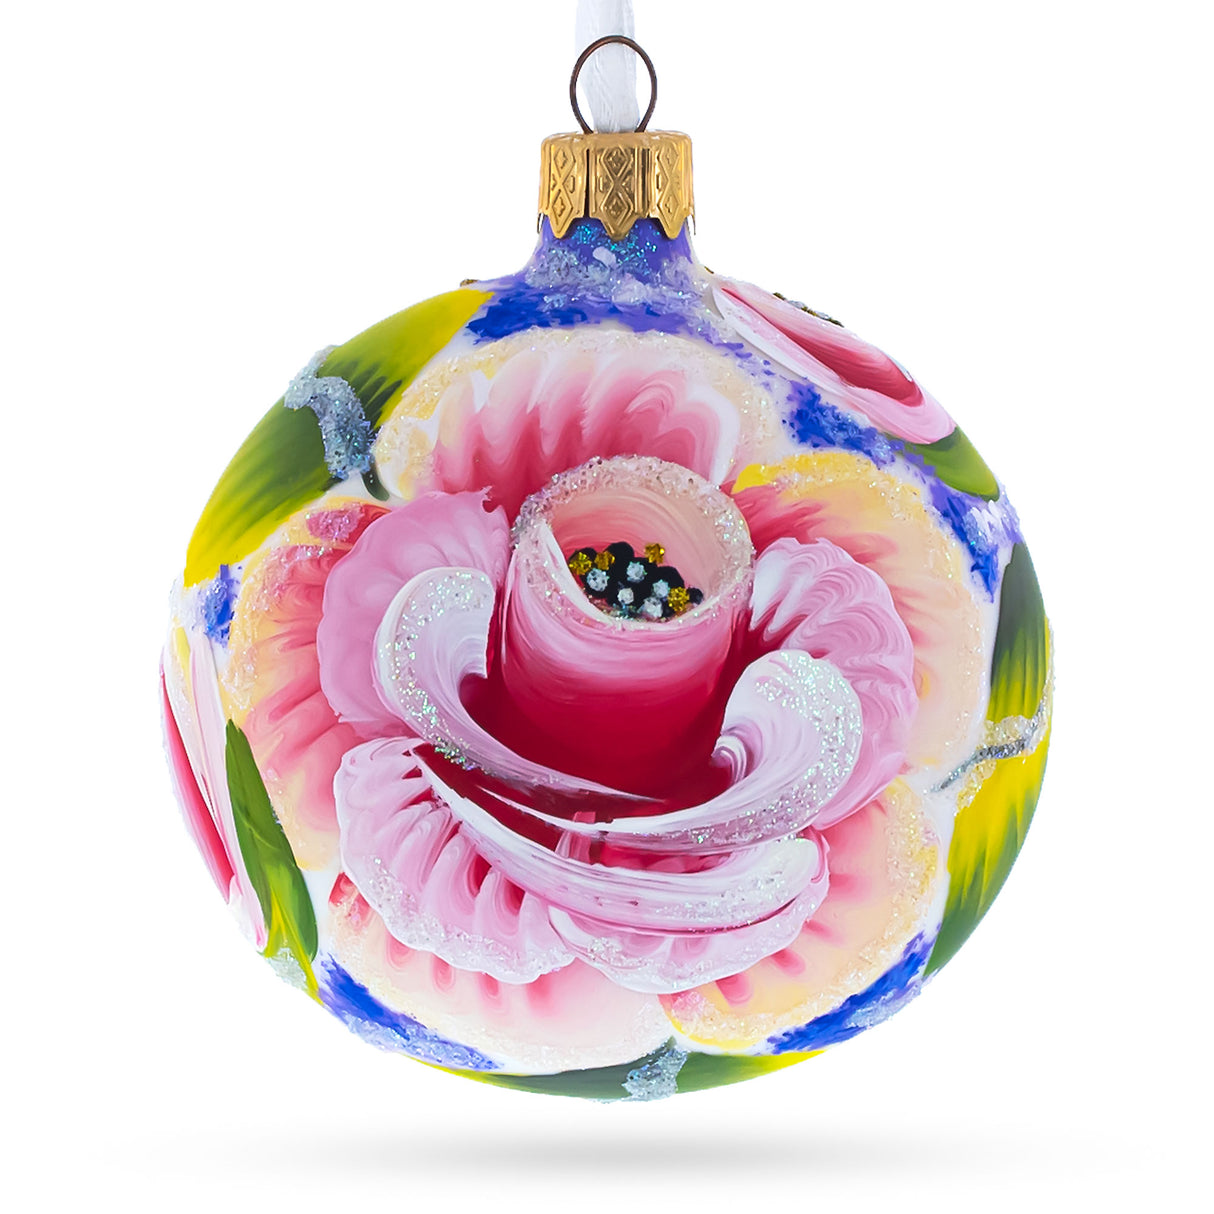 Exquisite Roses Flowers - Blown Glass Ball Christmas Ornament 3.25 Inches in Multi color, Round shape